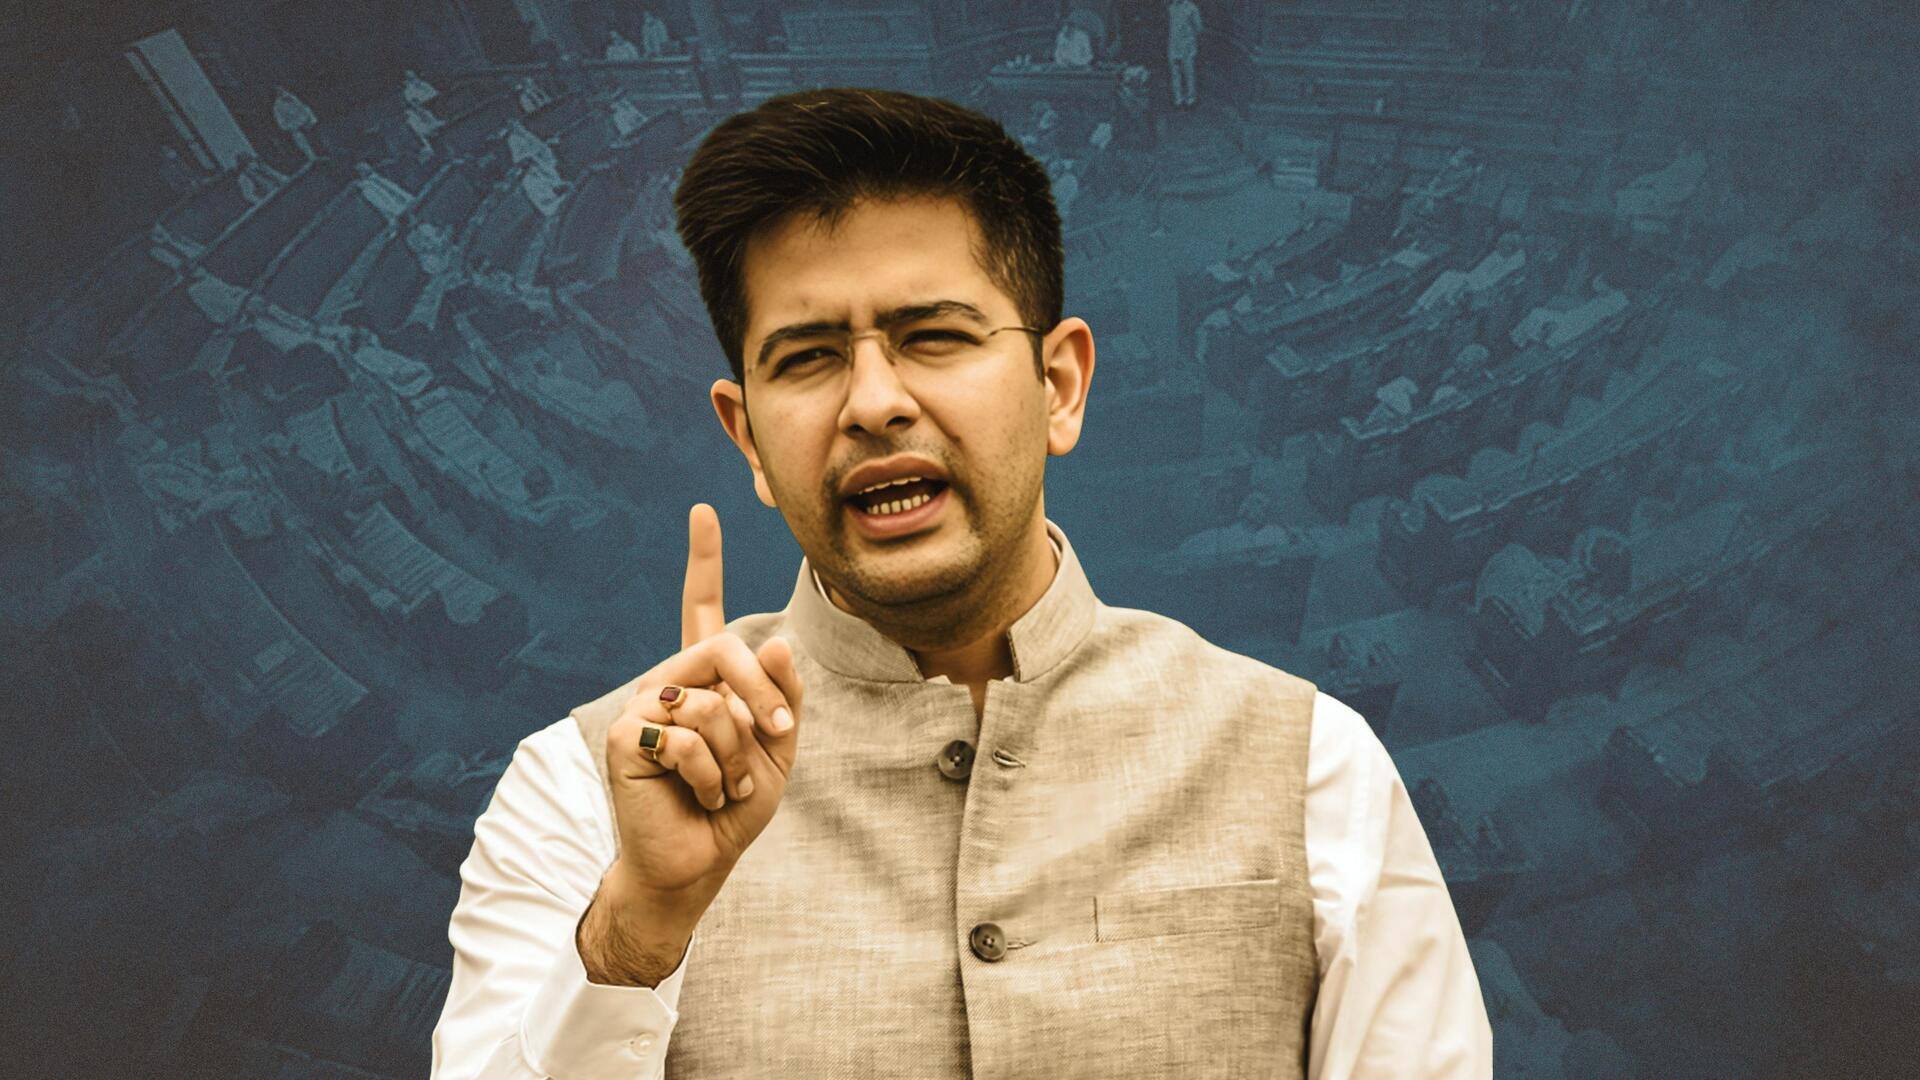 Raghav Chadha may face FIR for 'forged' motion in Parliament